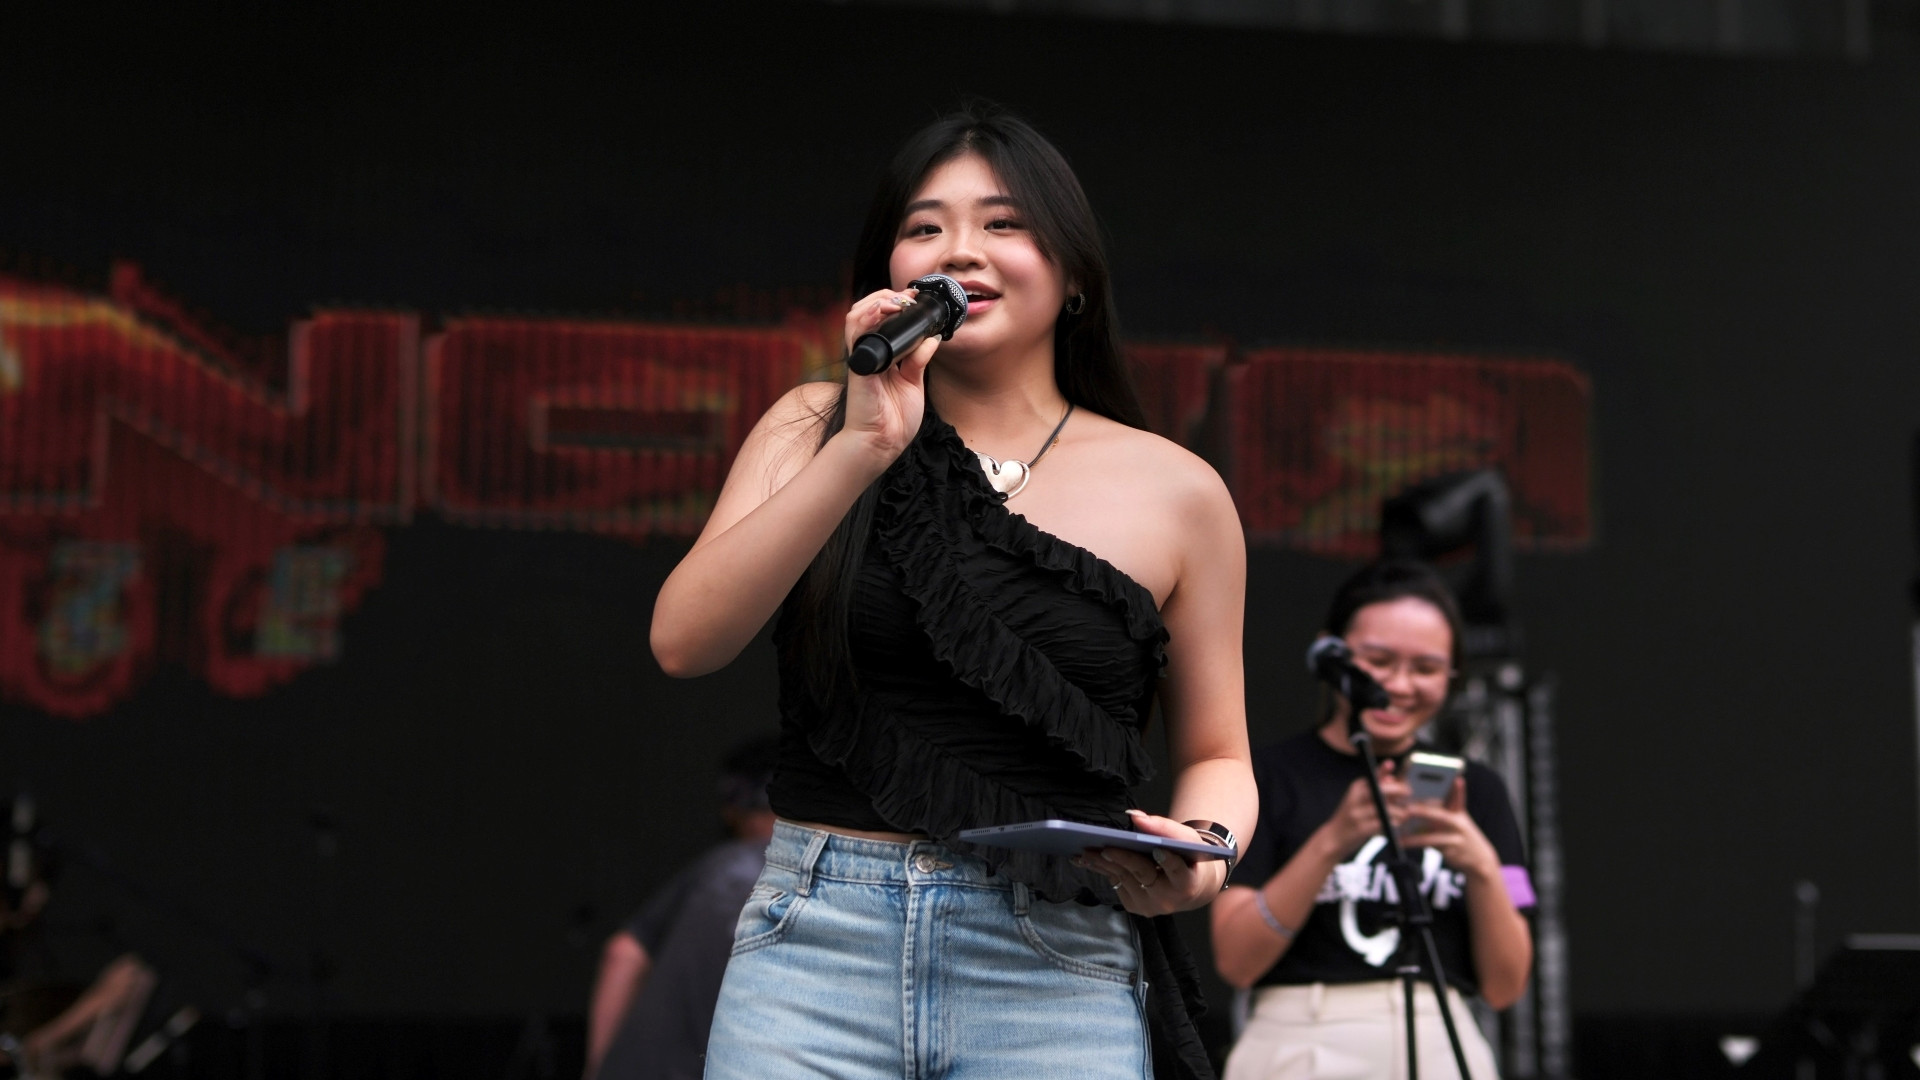 Local radio deejay and NUS alumna Miss Shawnia Seah embracing the energy from the audience as she returned to host the music festival for the second time.